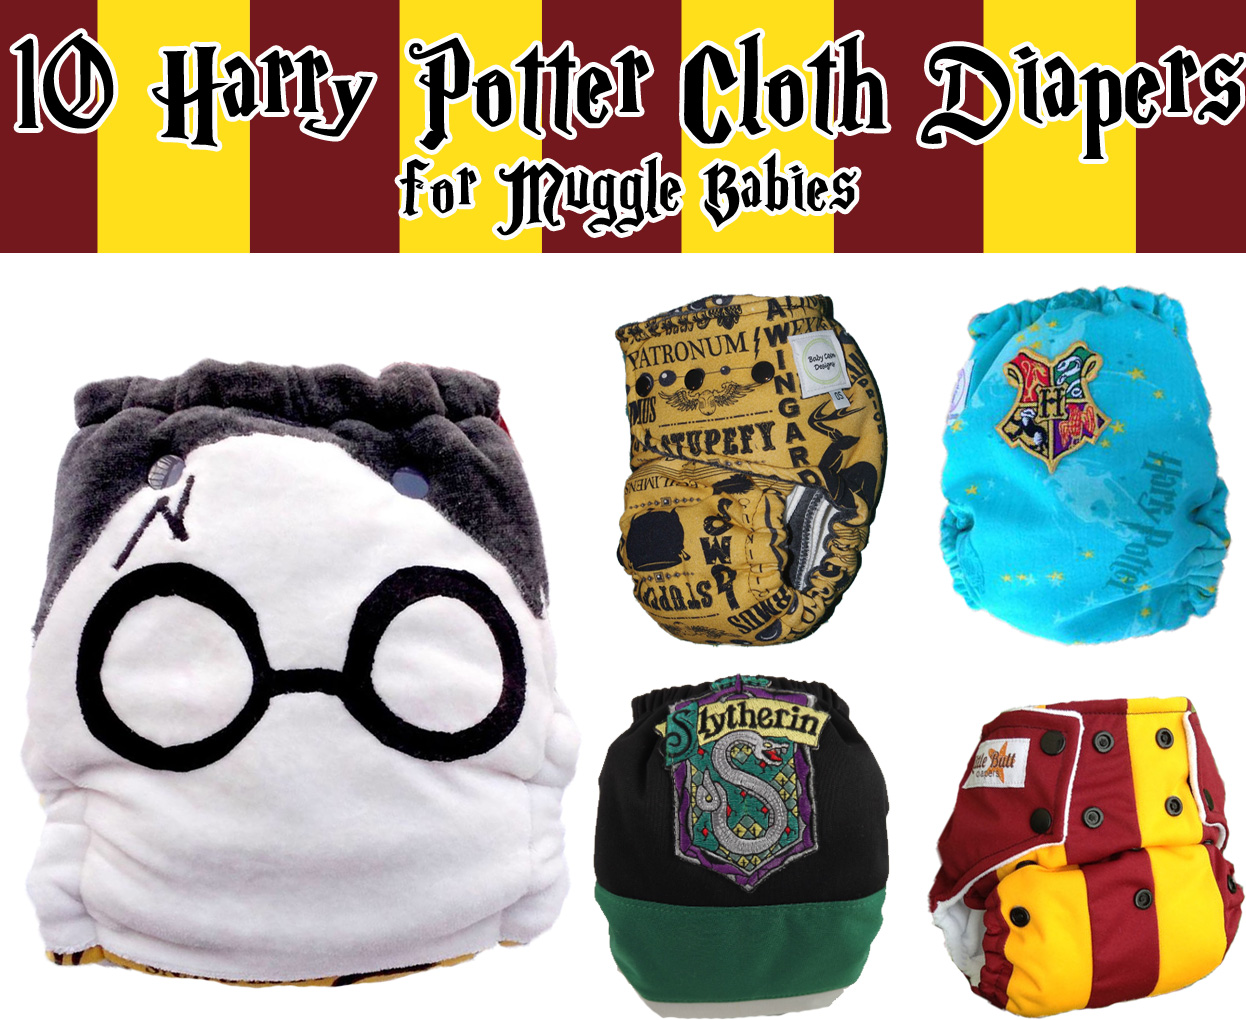 10 Harry Potter Cloth Diapers for 